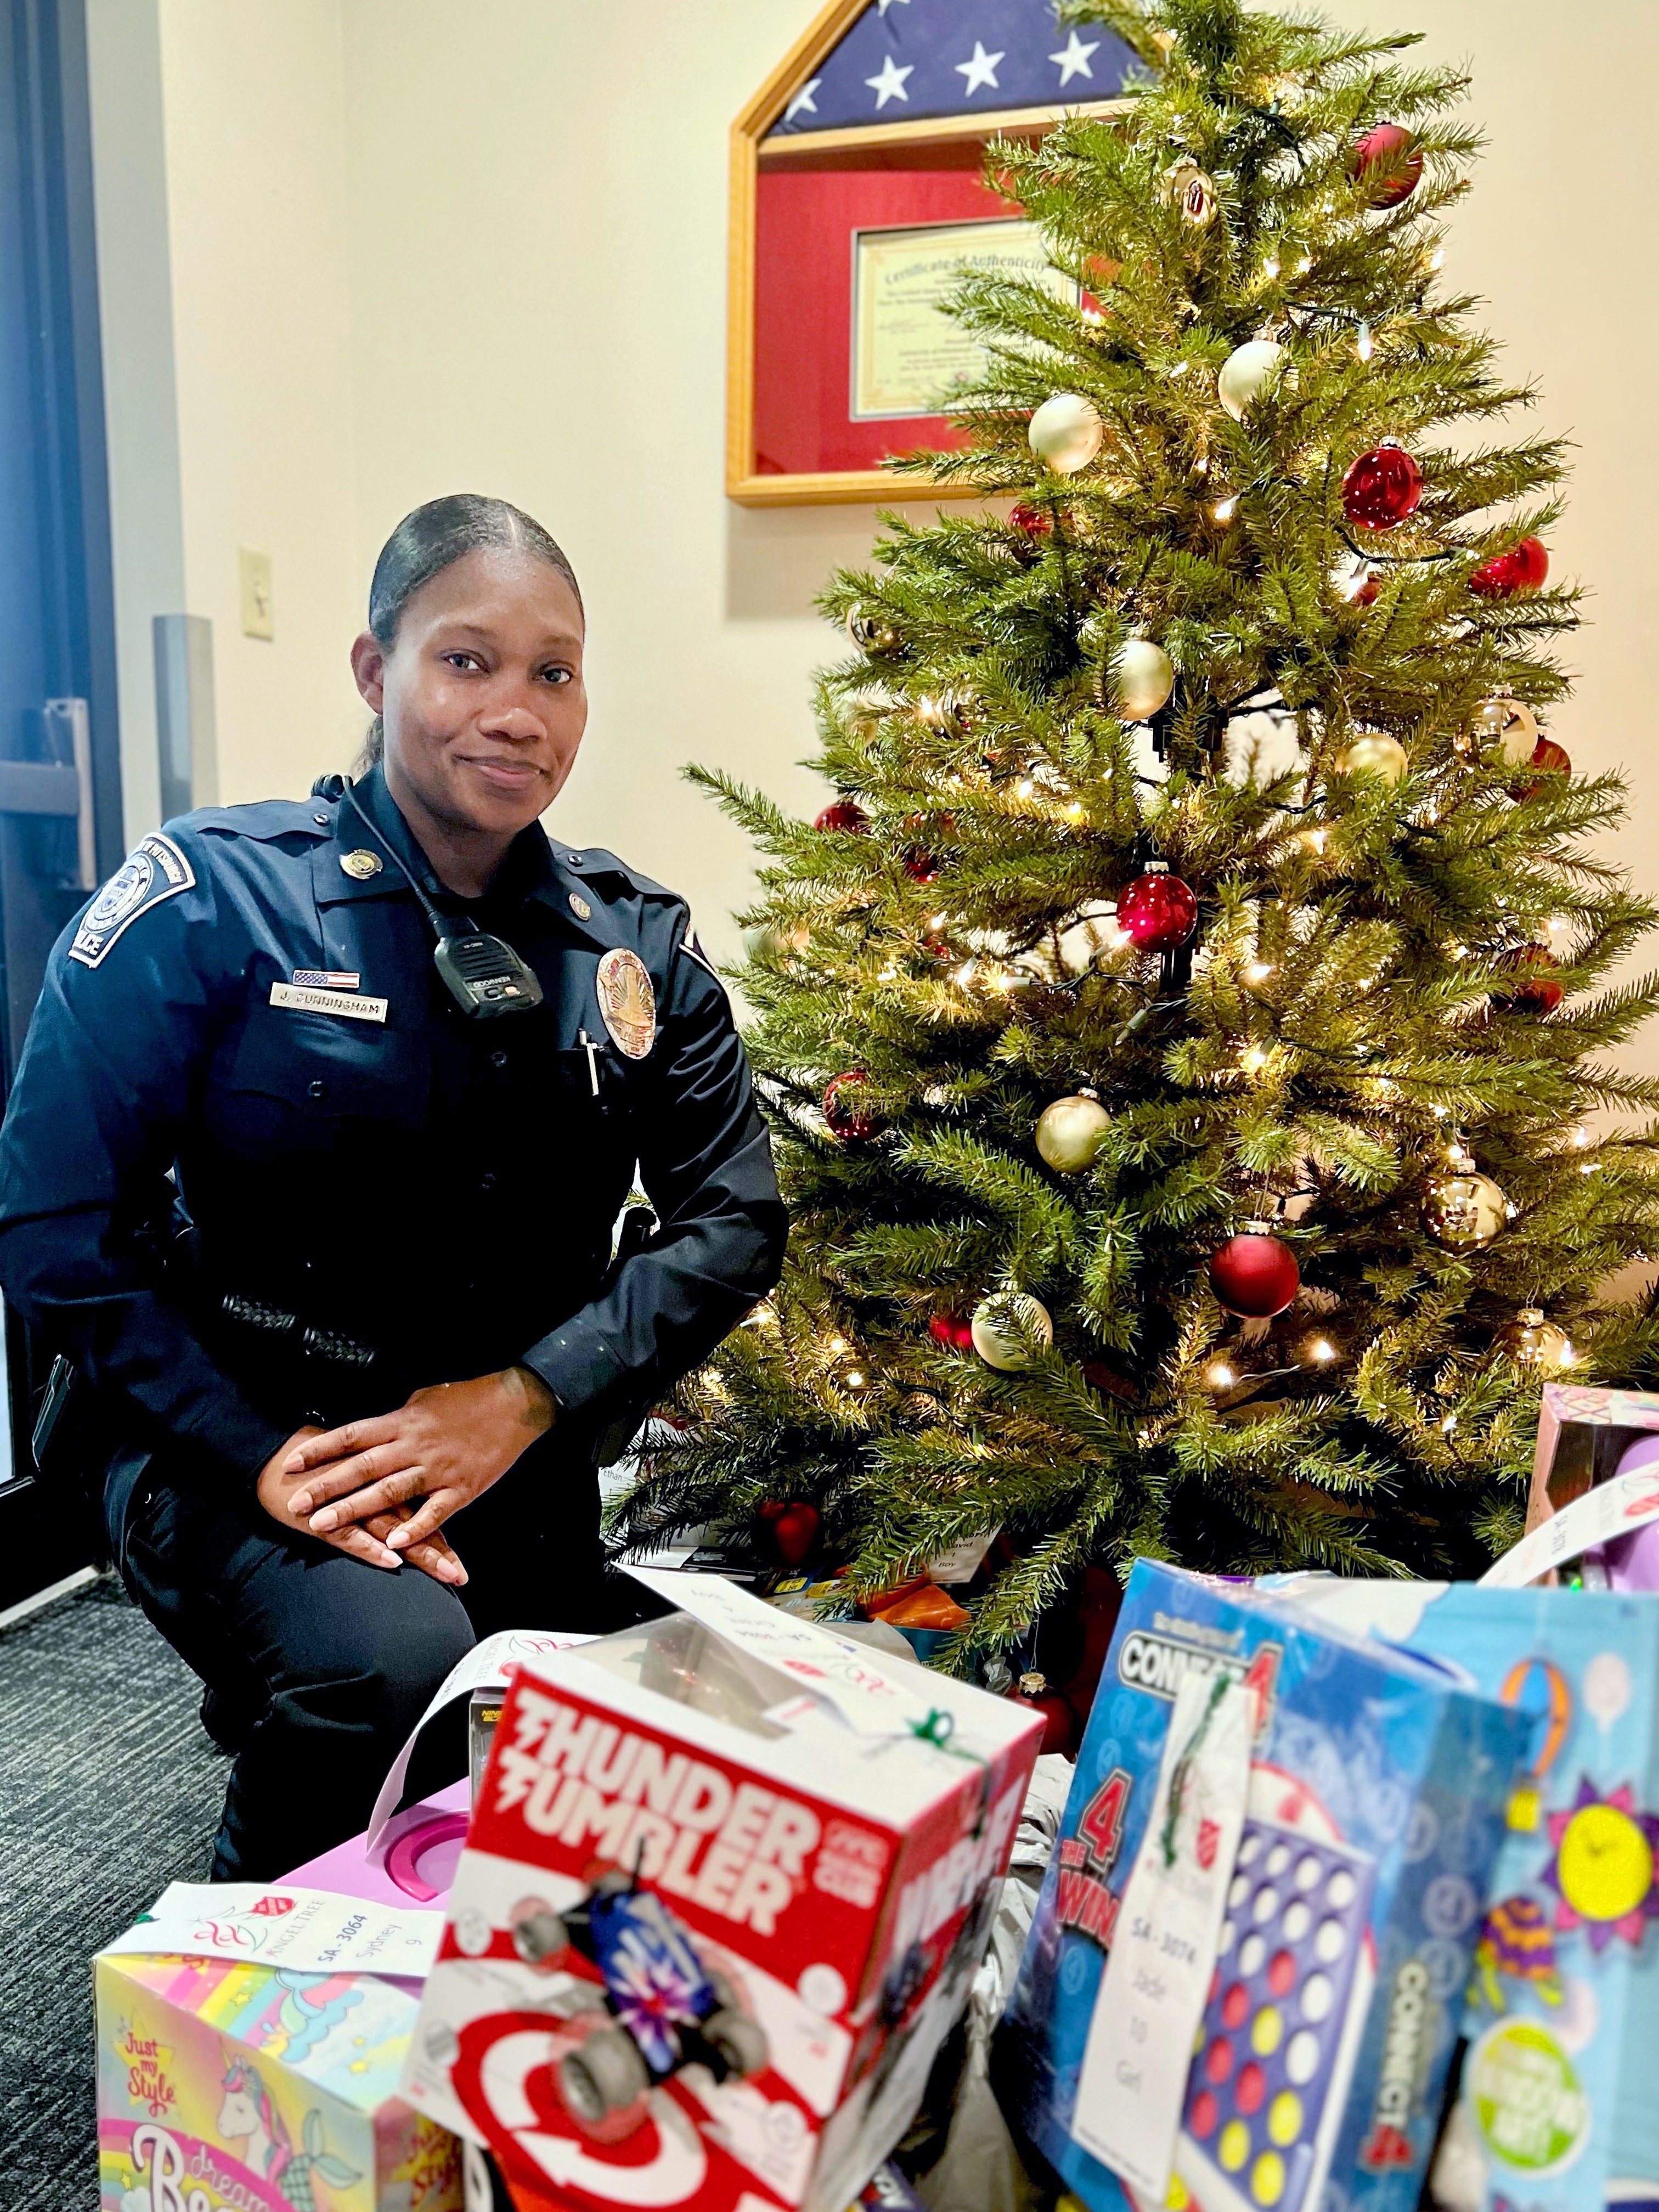  Pitt Police Officer Jamie Cunningham said the Office of Public Safety and Emergency Management will provide Christmas gifts to 60 children in need throughout the Pittsburgh metro area.  